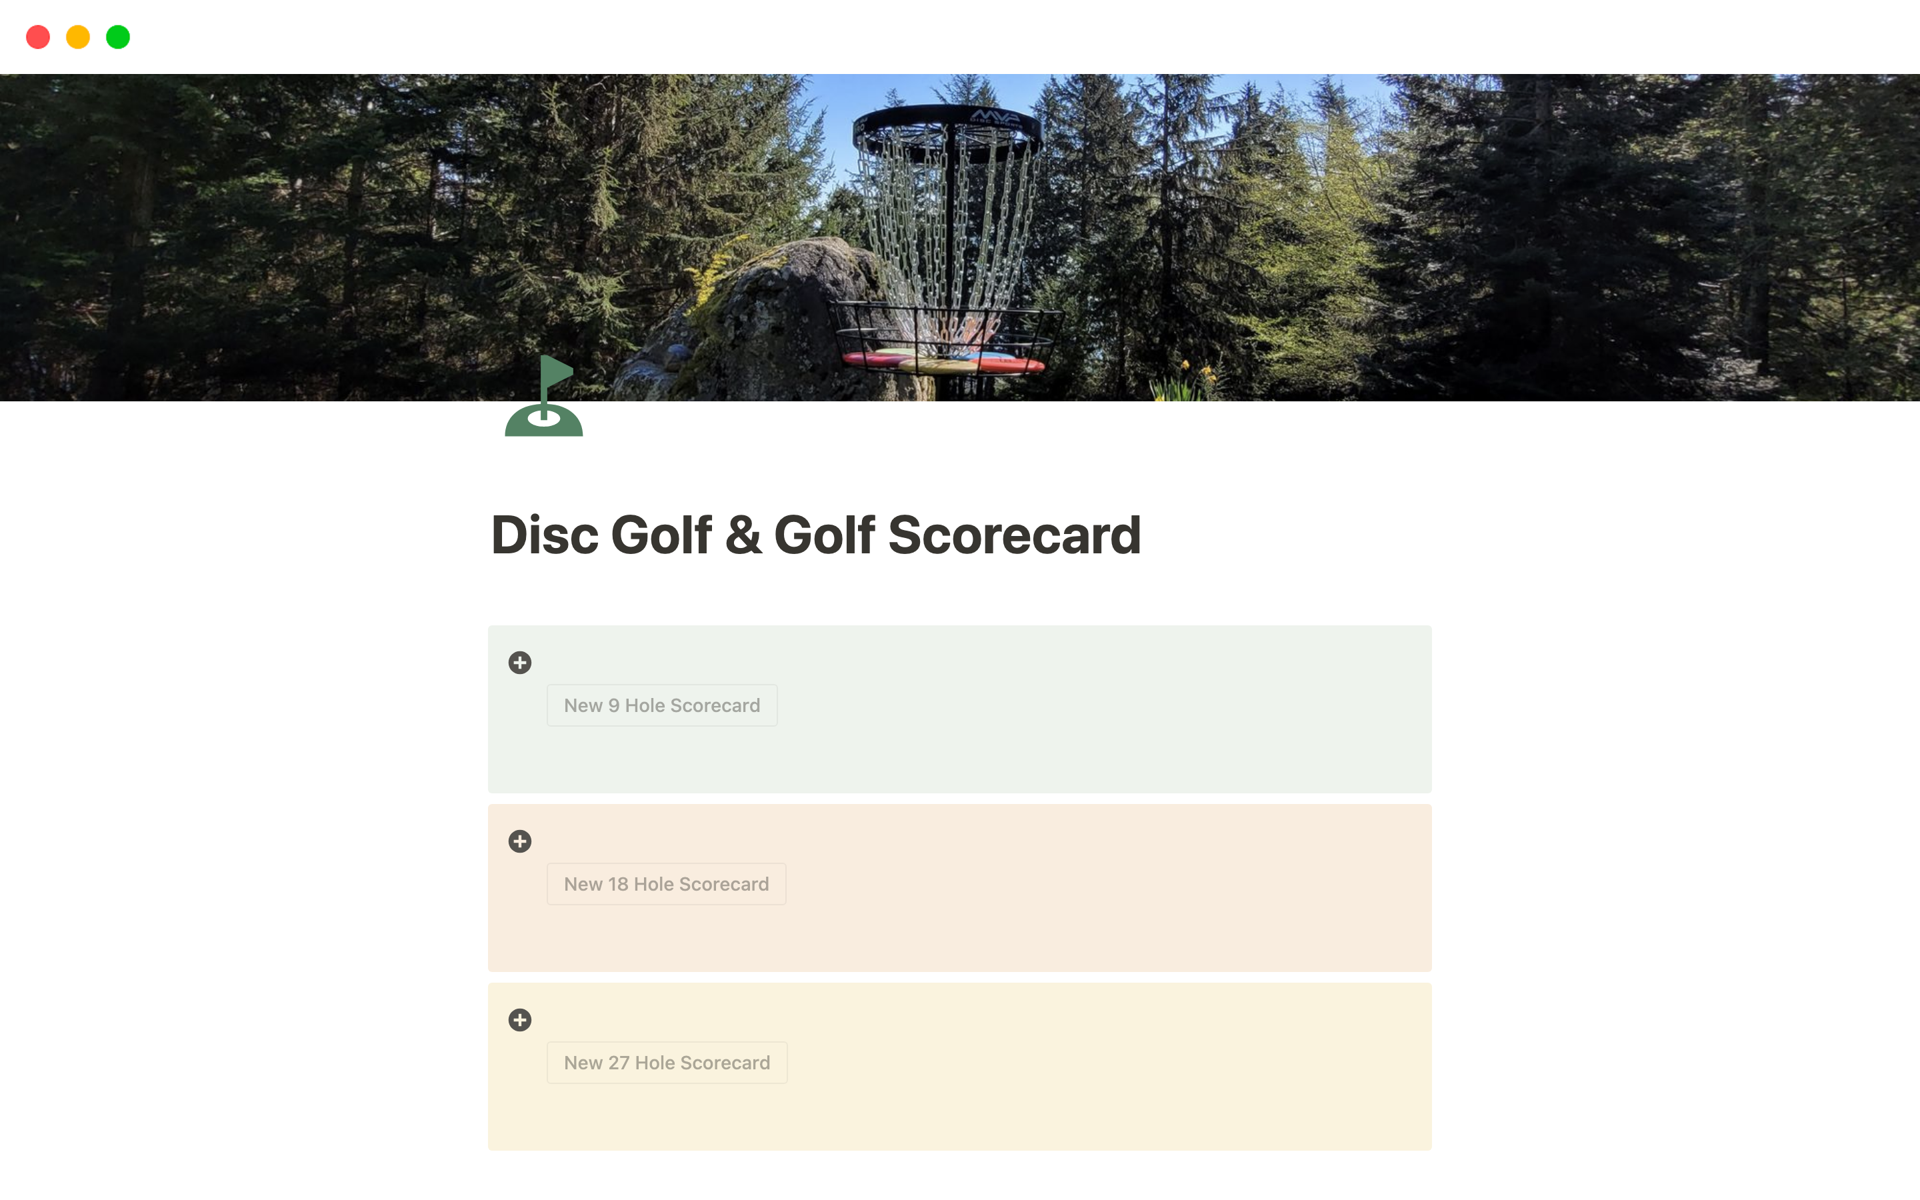 This Notion scorecard template allows you to digitally track your individual score for 9,18, and 27 hole layouts. You can also add or subtract holes from your scorecard.